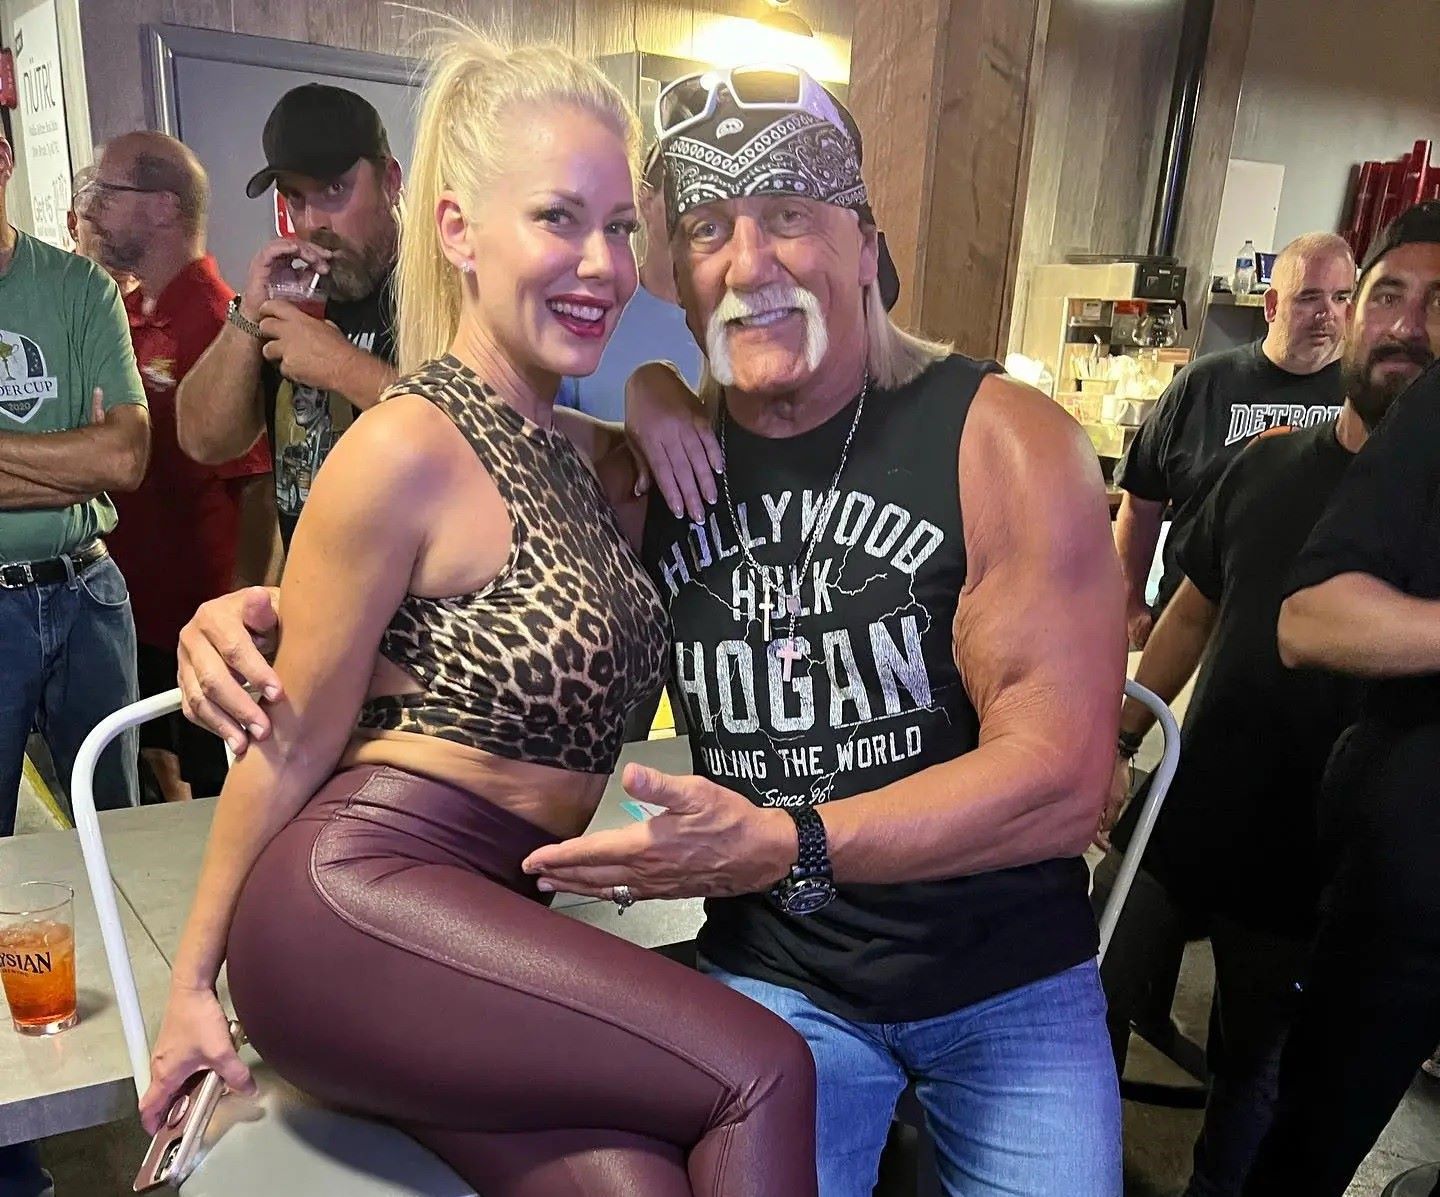 Hulk Hogan Ties The Knot With Sky Daily In An Intimate Florida Wedding Ceremony